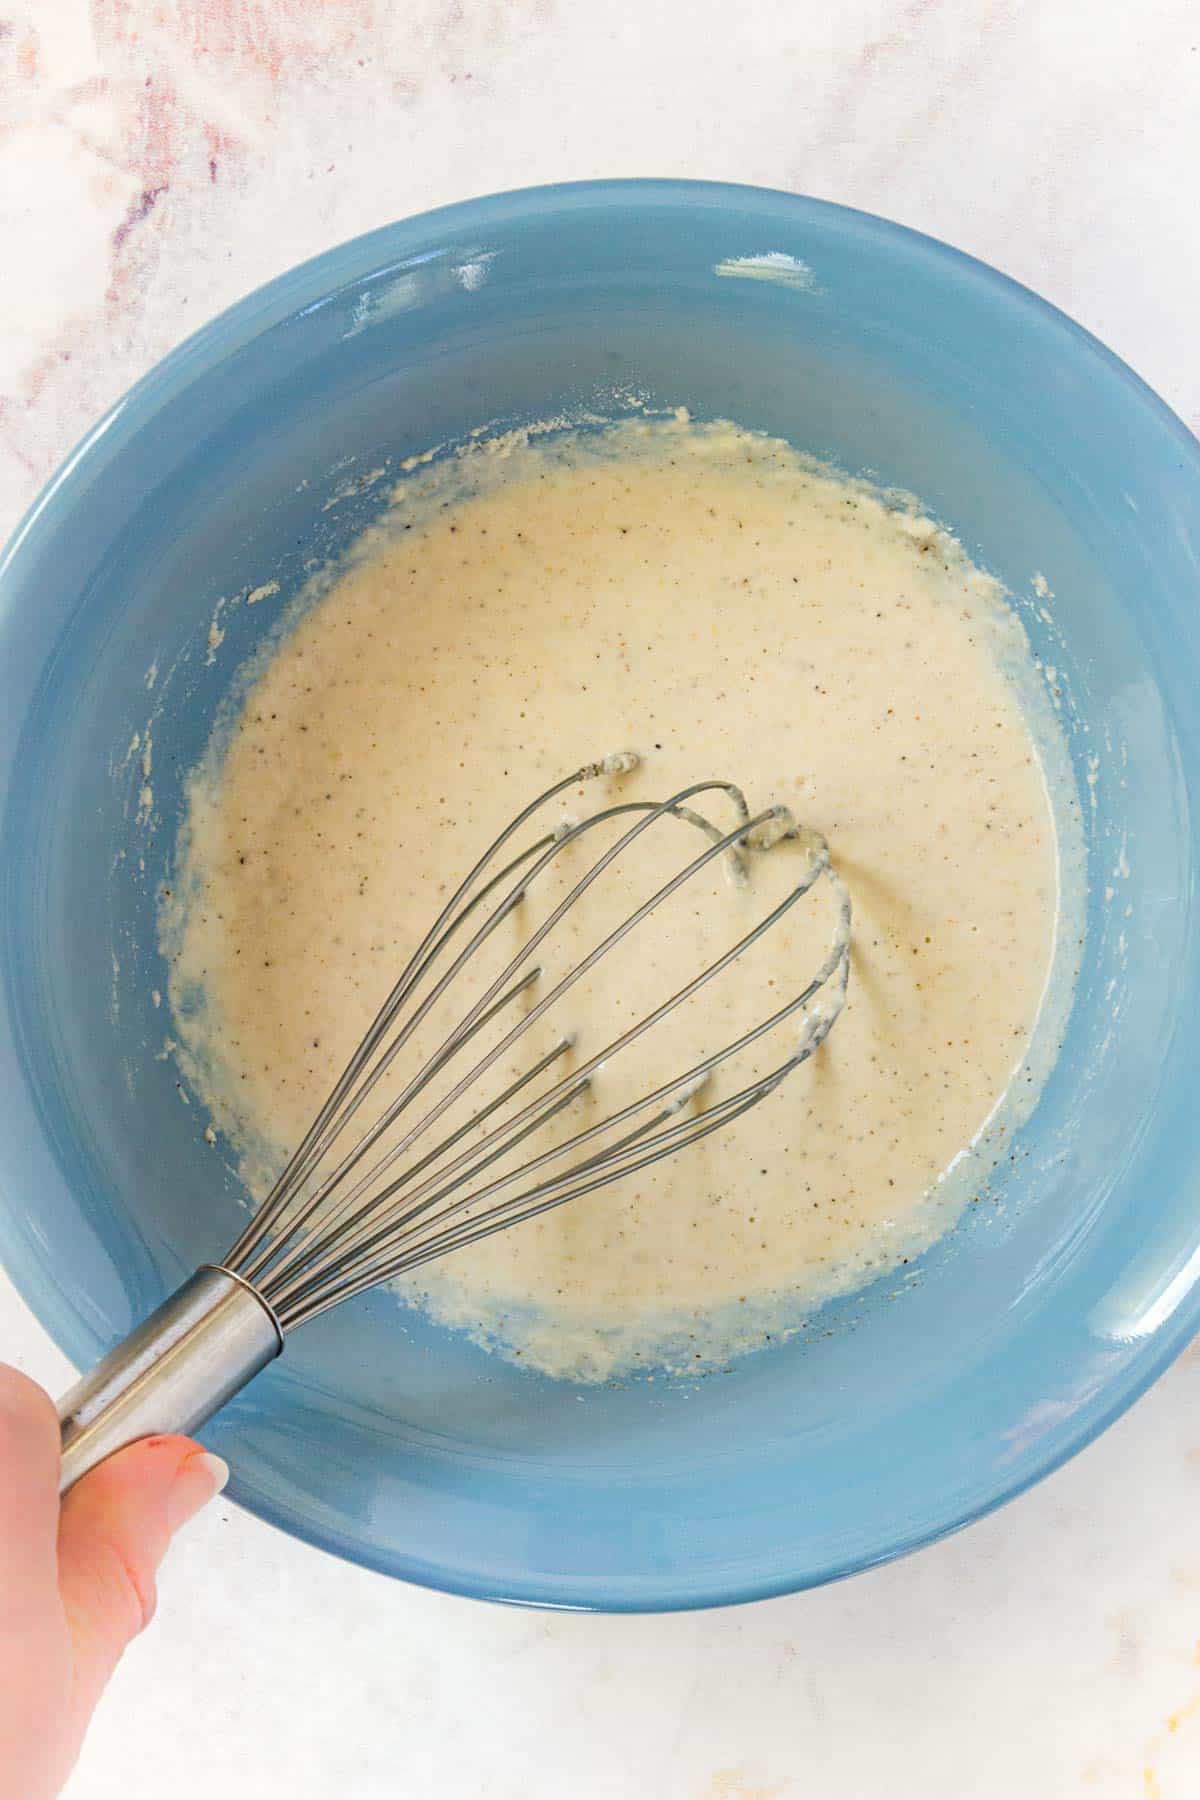 Hand holding a whisk in a bowl of batter.